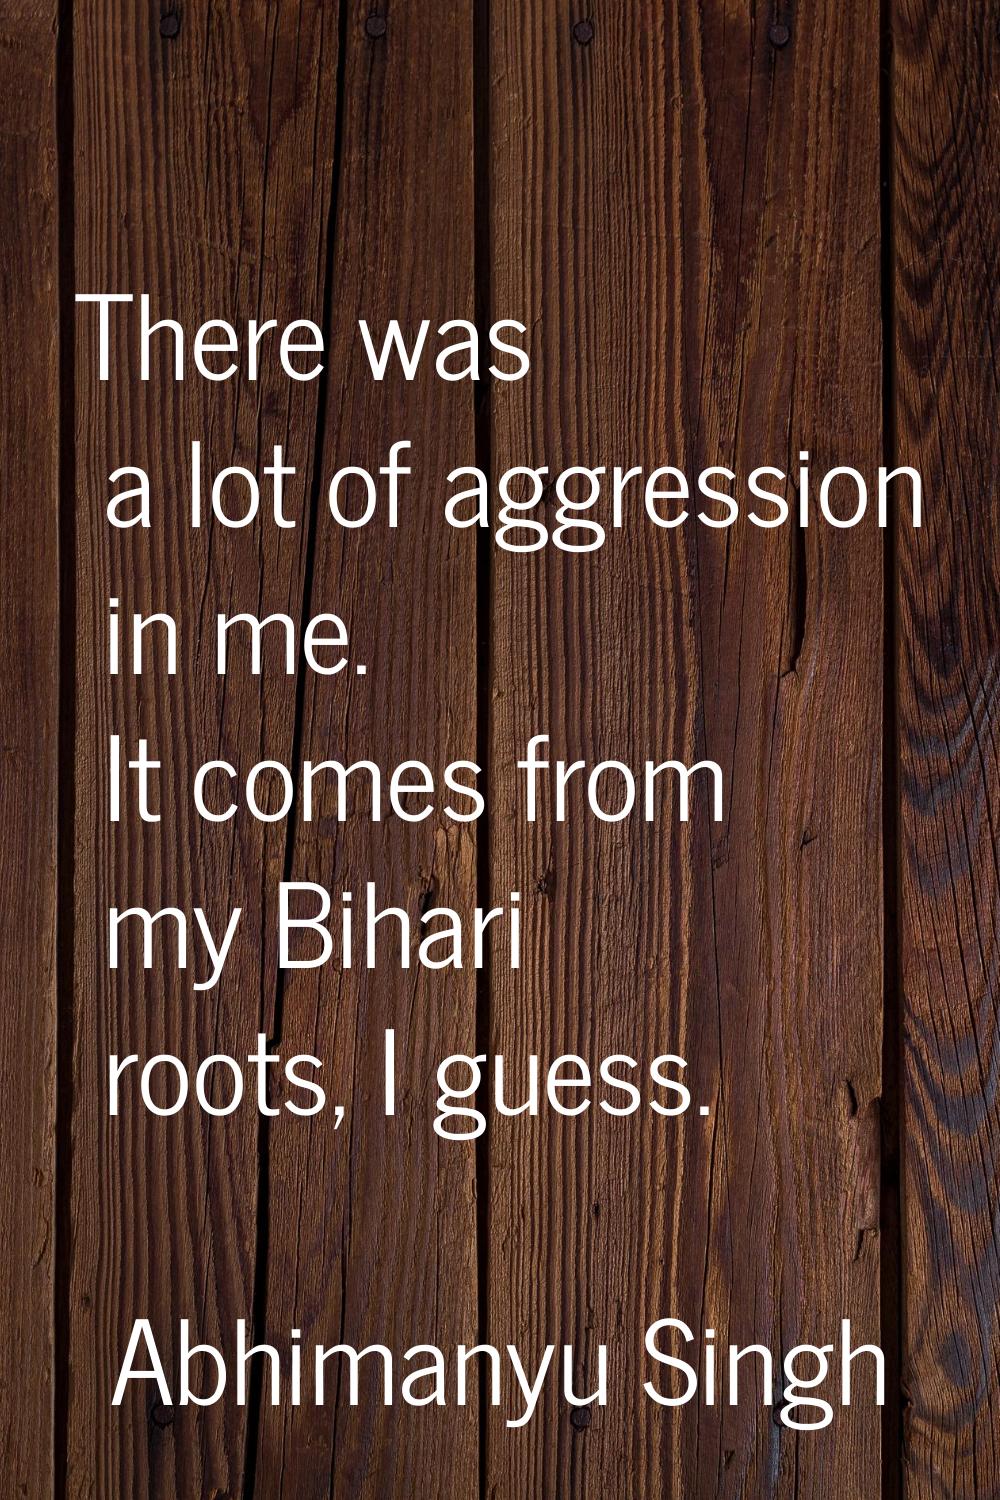 There was a lot of aggression in me. It comes from my Bihari roots, I guess.